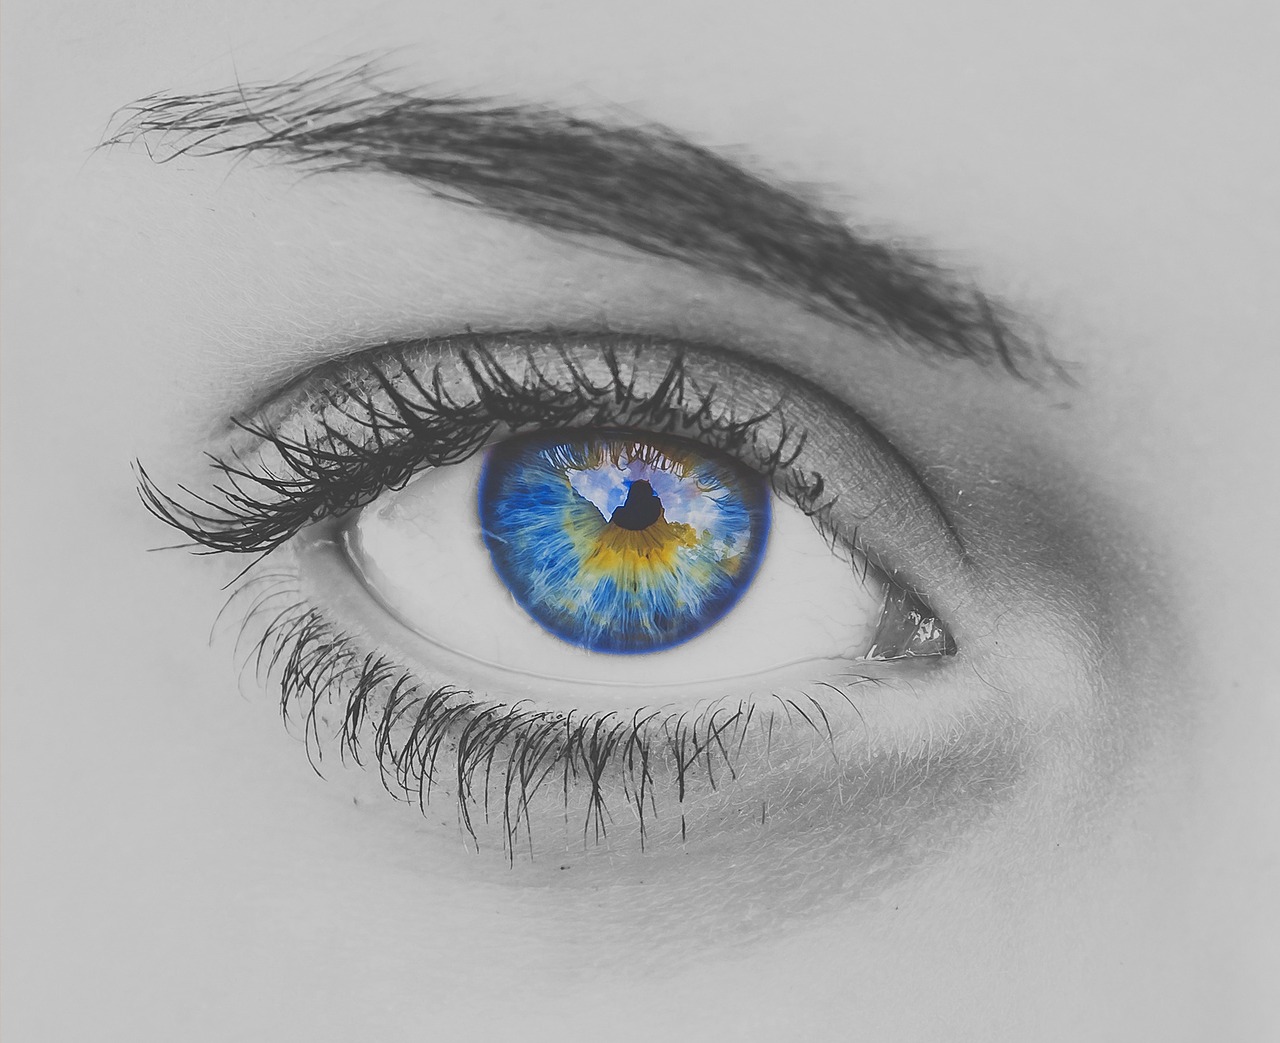 A black and white photo of a woman's eye with the pupil multi-colored.